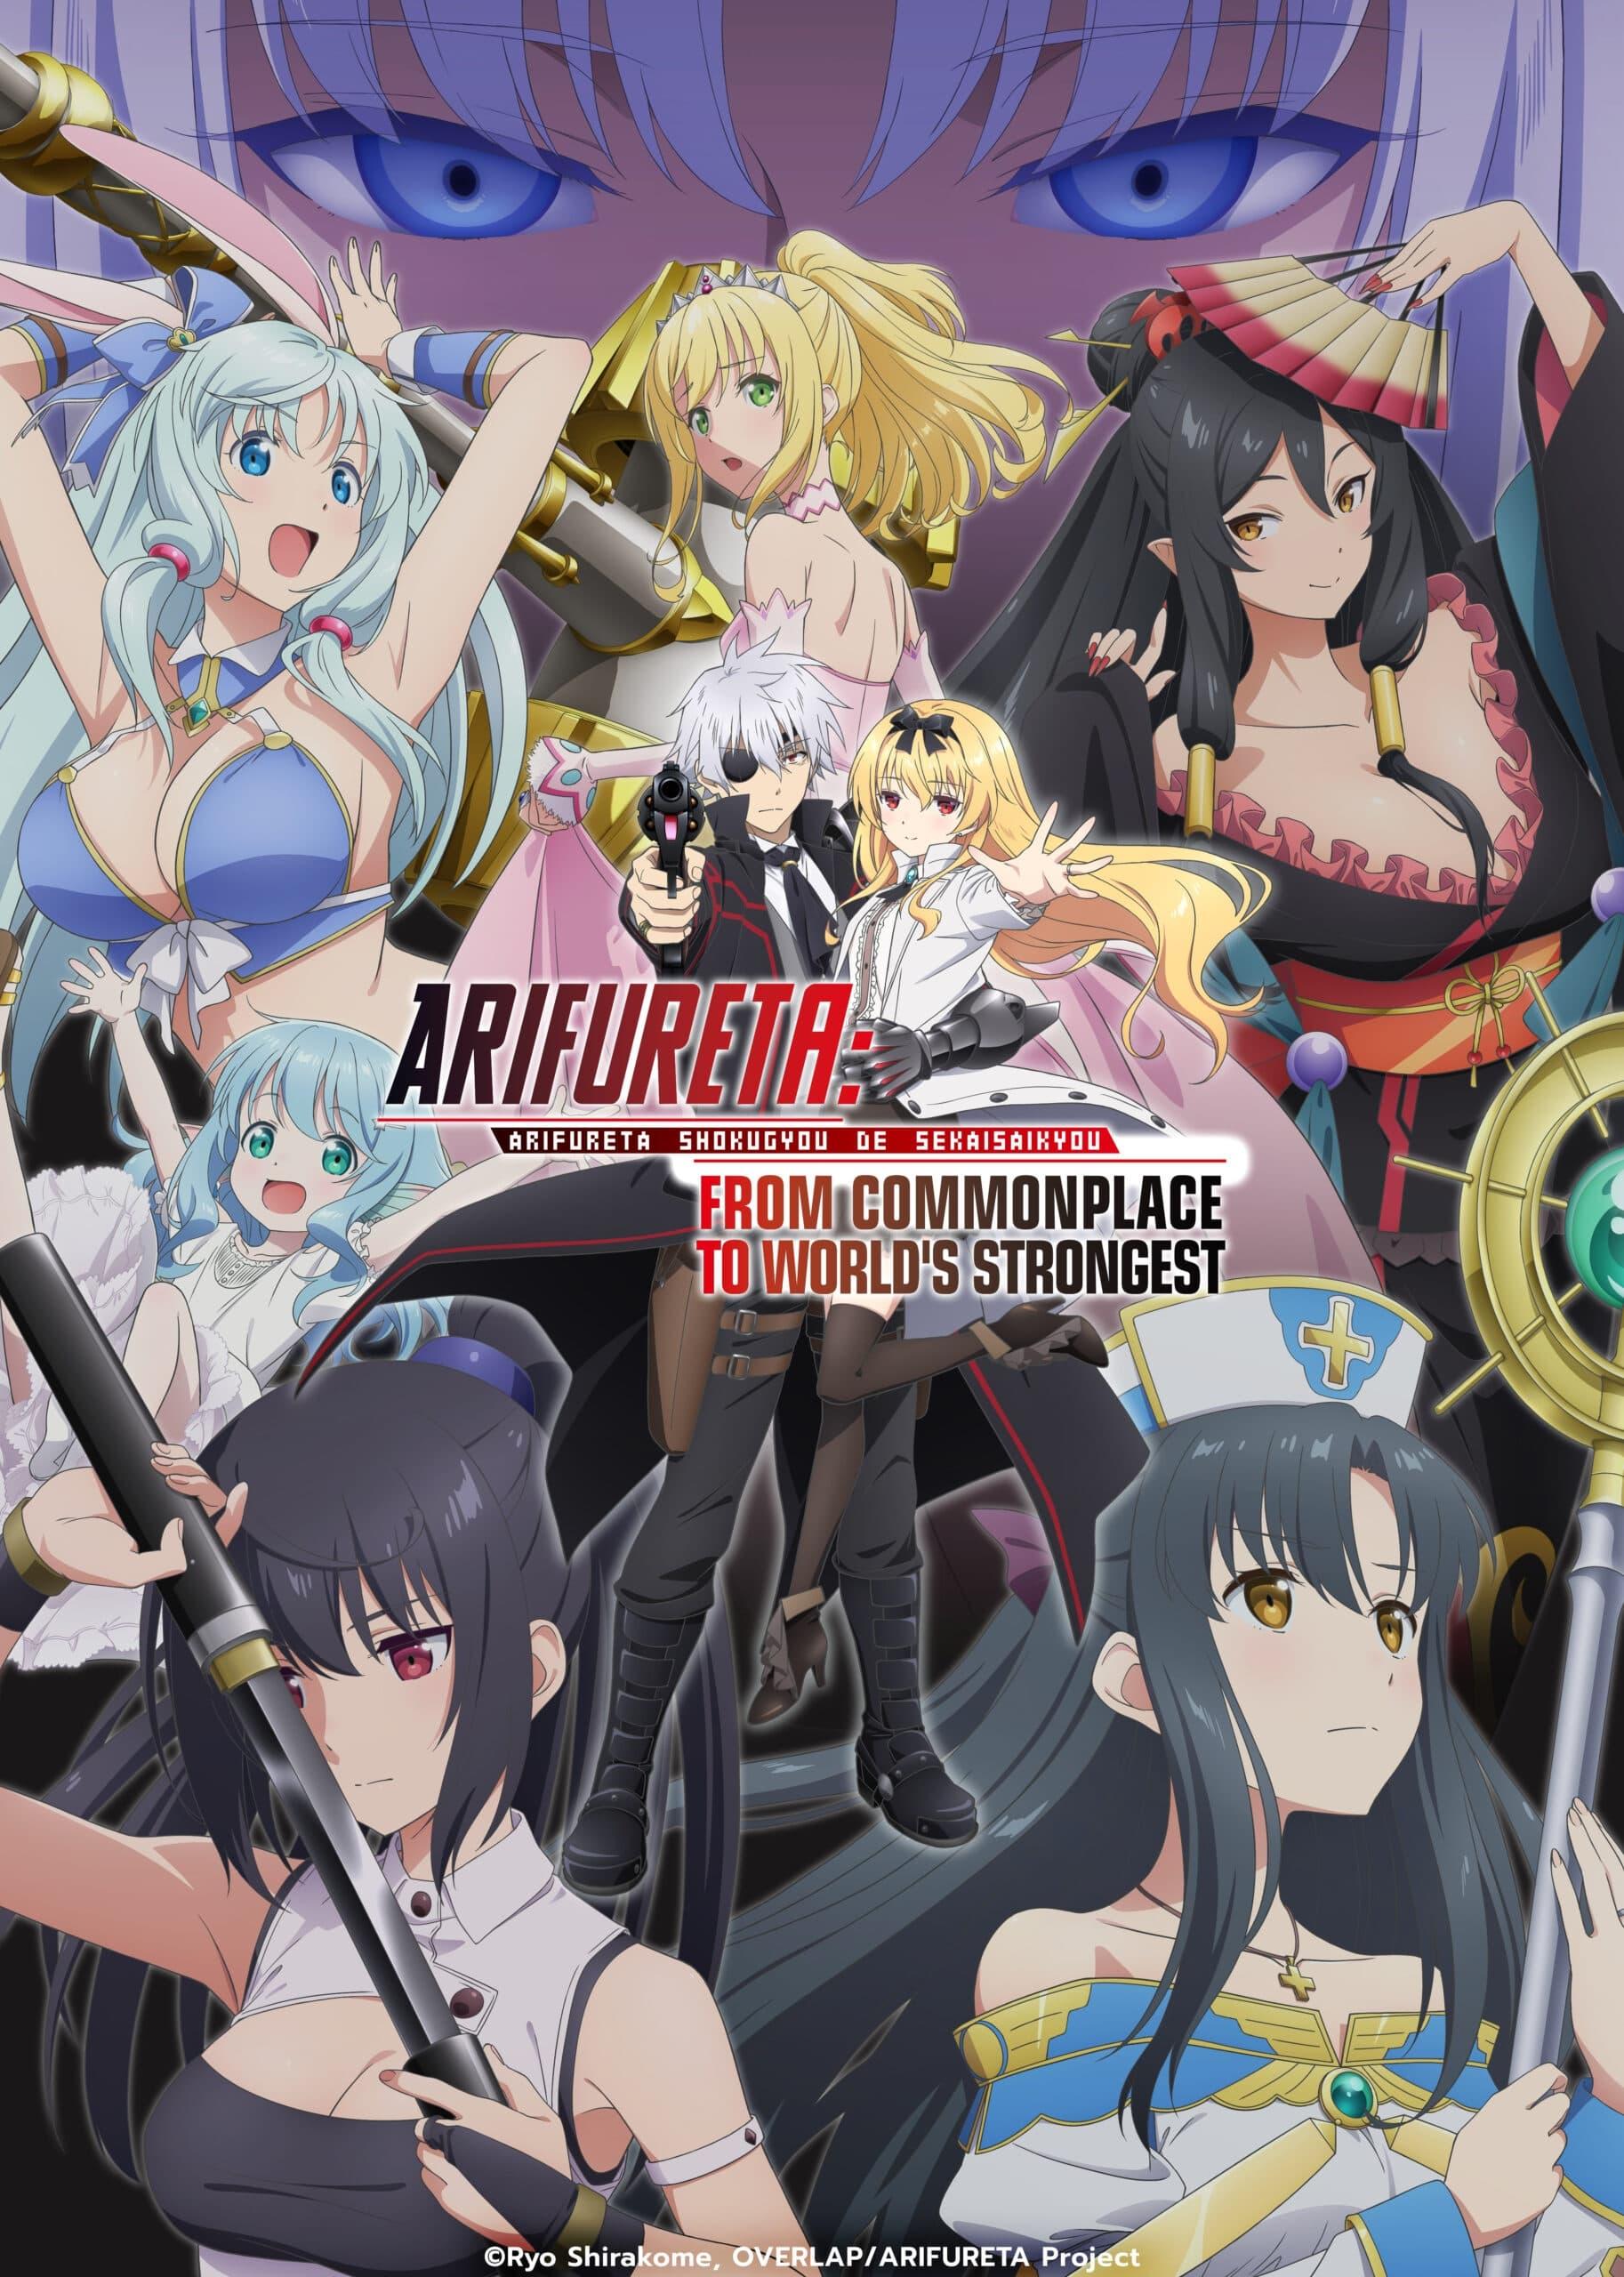 Arifureta: From Commonplace to World's Strongest poster